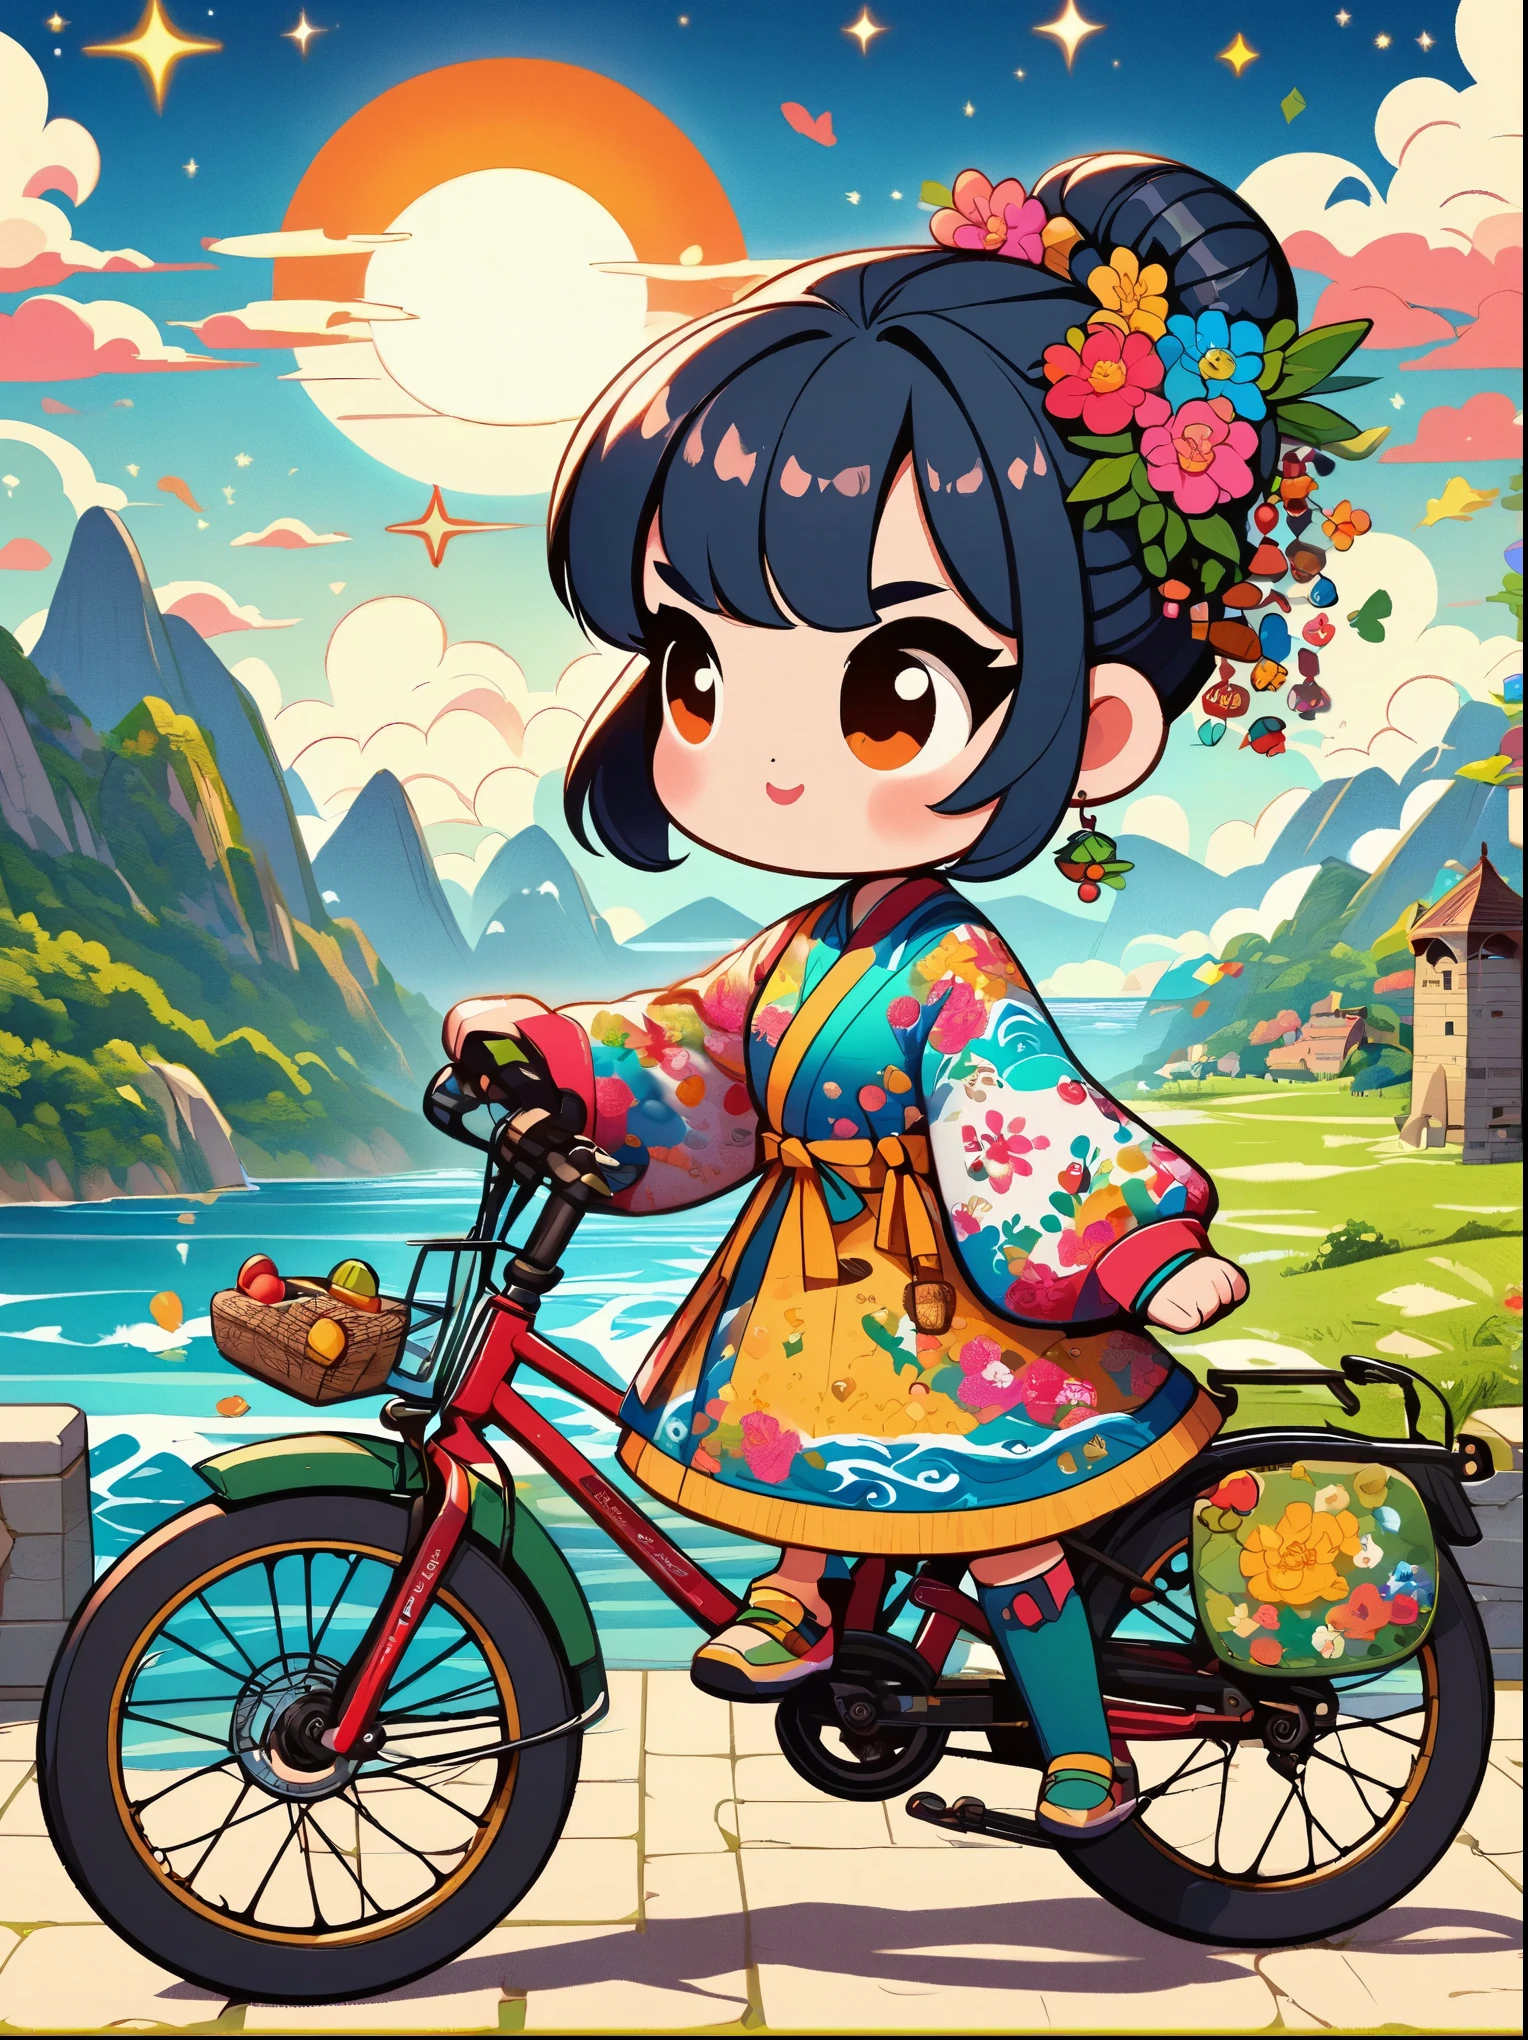 (1 girl riding a mountain bike along the coastline chasing the sun), in the Stars Art Troupe (Stars) style, cheerful figurative art, free flowing lines, style bright bold color palette, post-Internet aesthetics, color animation static, travel, romantic illustrations, full of hidden details, graphic design inspired illustration